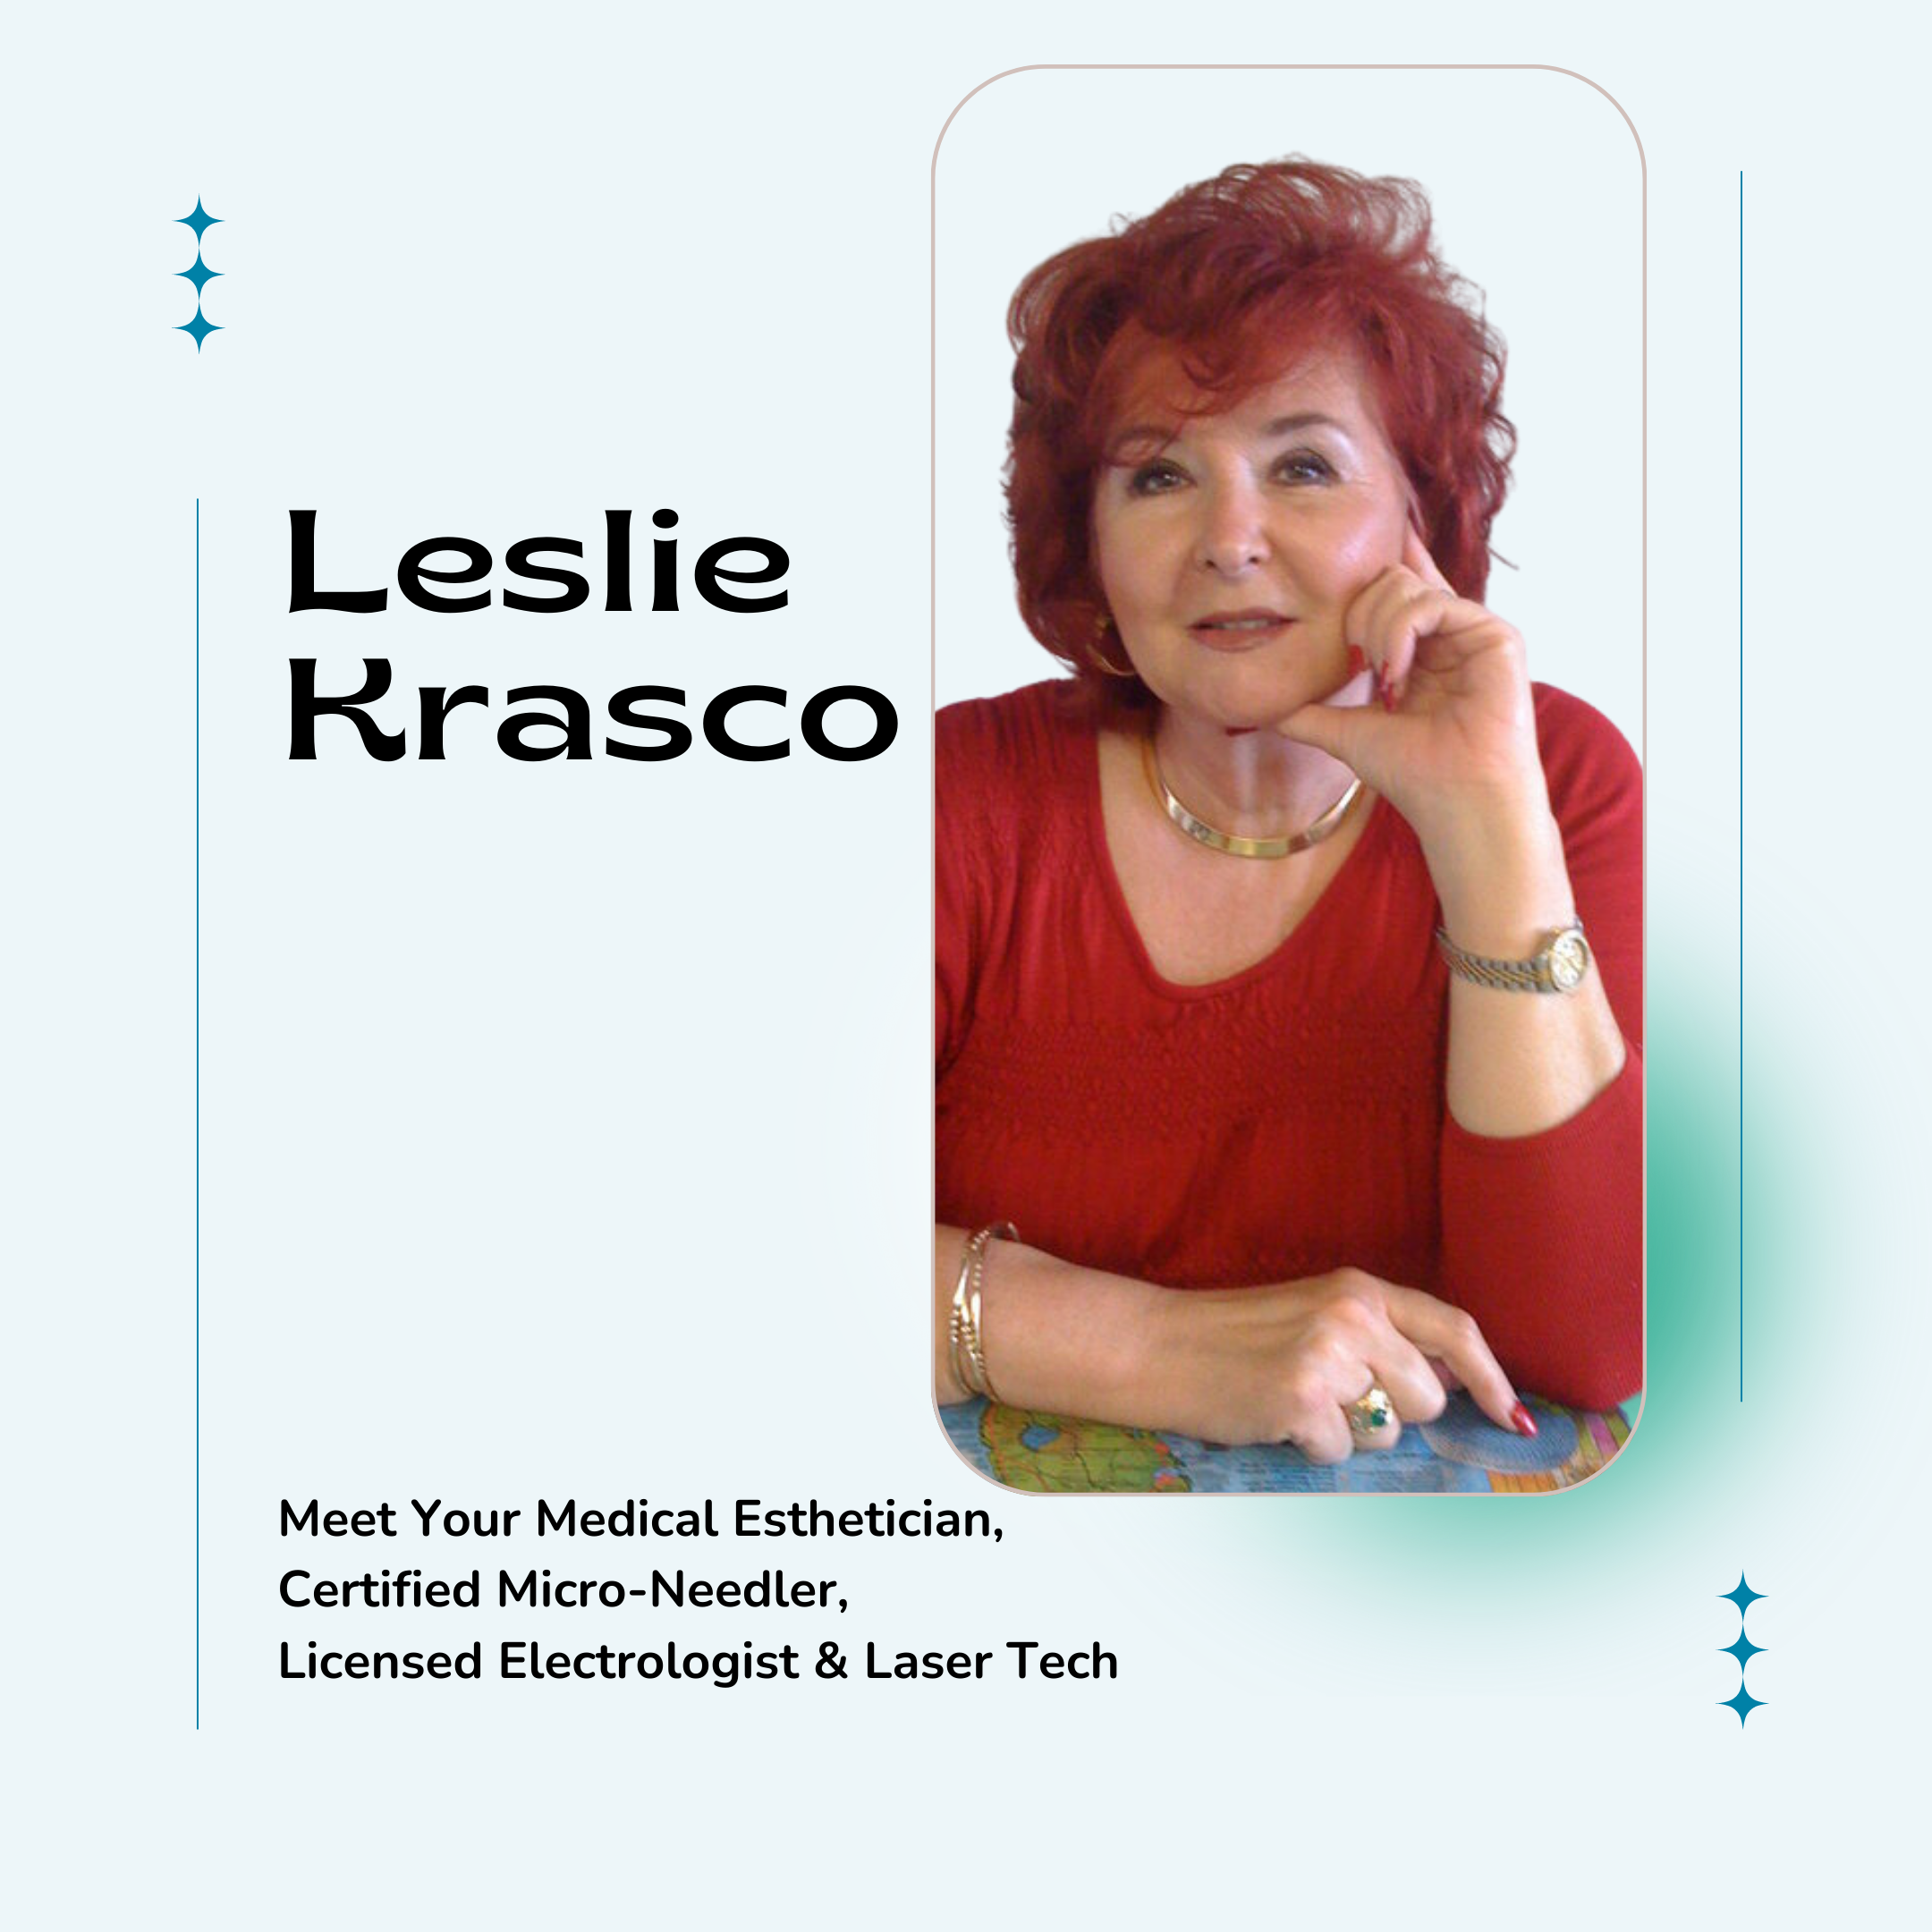 My name is Leslie Krasco, and I’m thrilled to connect with you on LinkedIn. As a highly skilled and licensed laser tech, medical esthetician, certified micro-needler, and licensed electrologist, my passion lies in helping individuals look and feel their absolute best. With expertise in Cutera laser technology, I specialize in utilizing non-invasive treatments to address a range of concerns. Whether it’s tackling fine-line wrinkles or managing diffuse redness and excessive redness, my goal is to provide safe and effective solutions for all skin types.